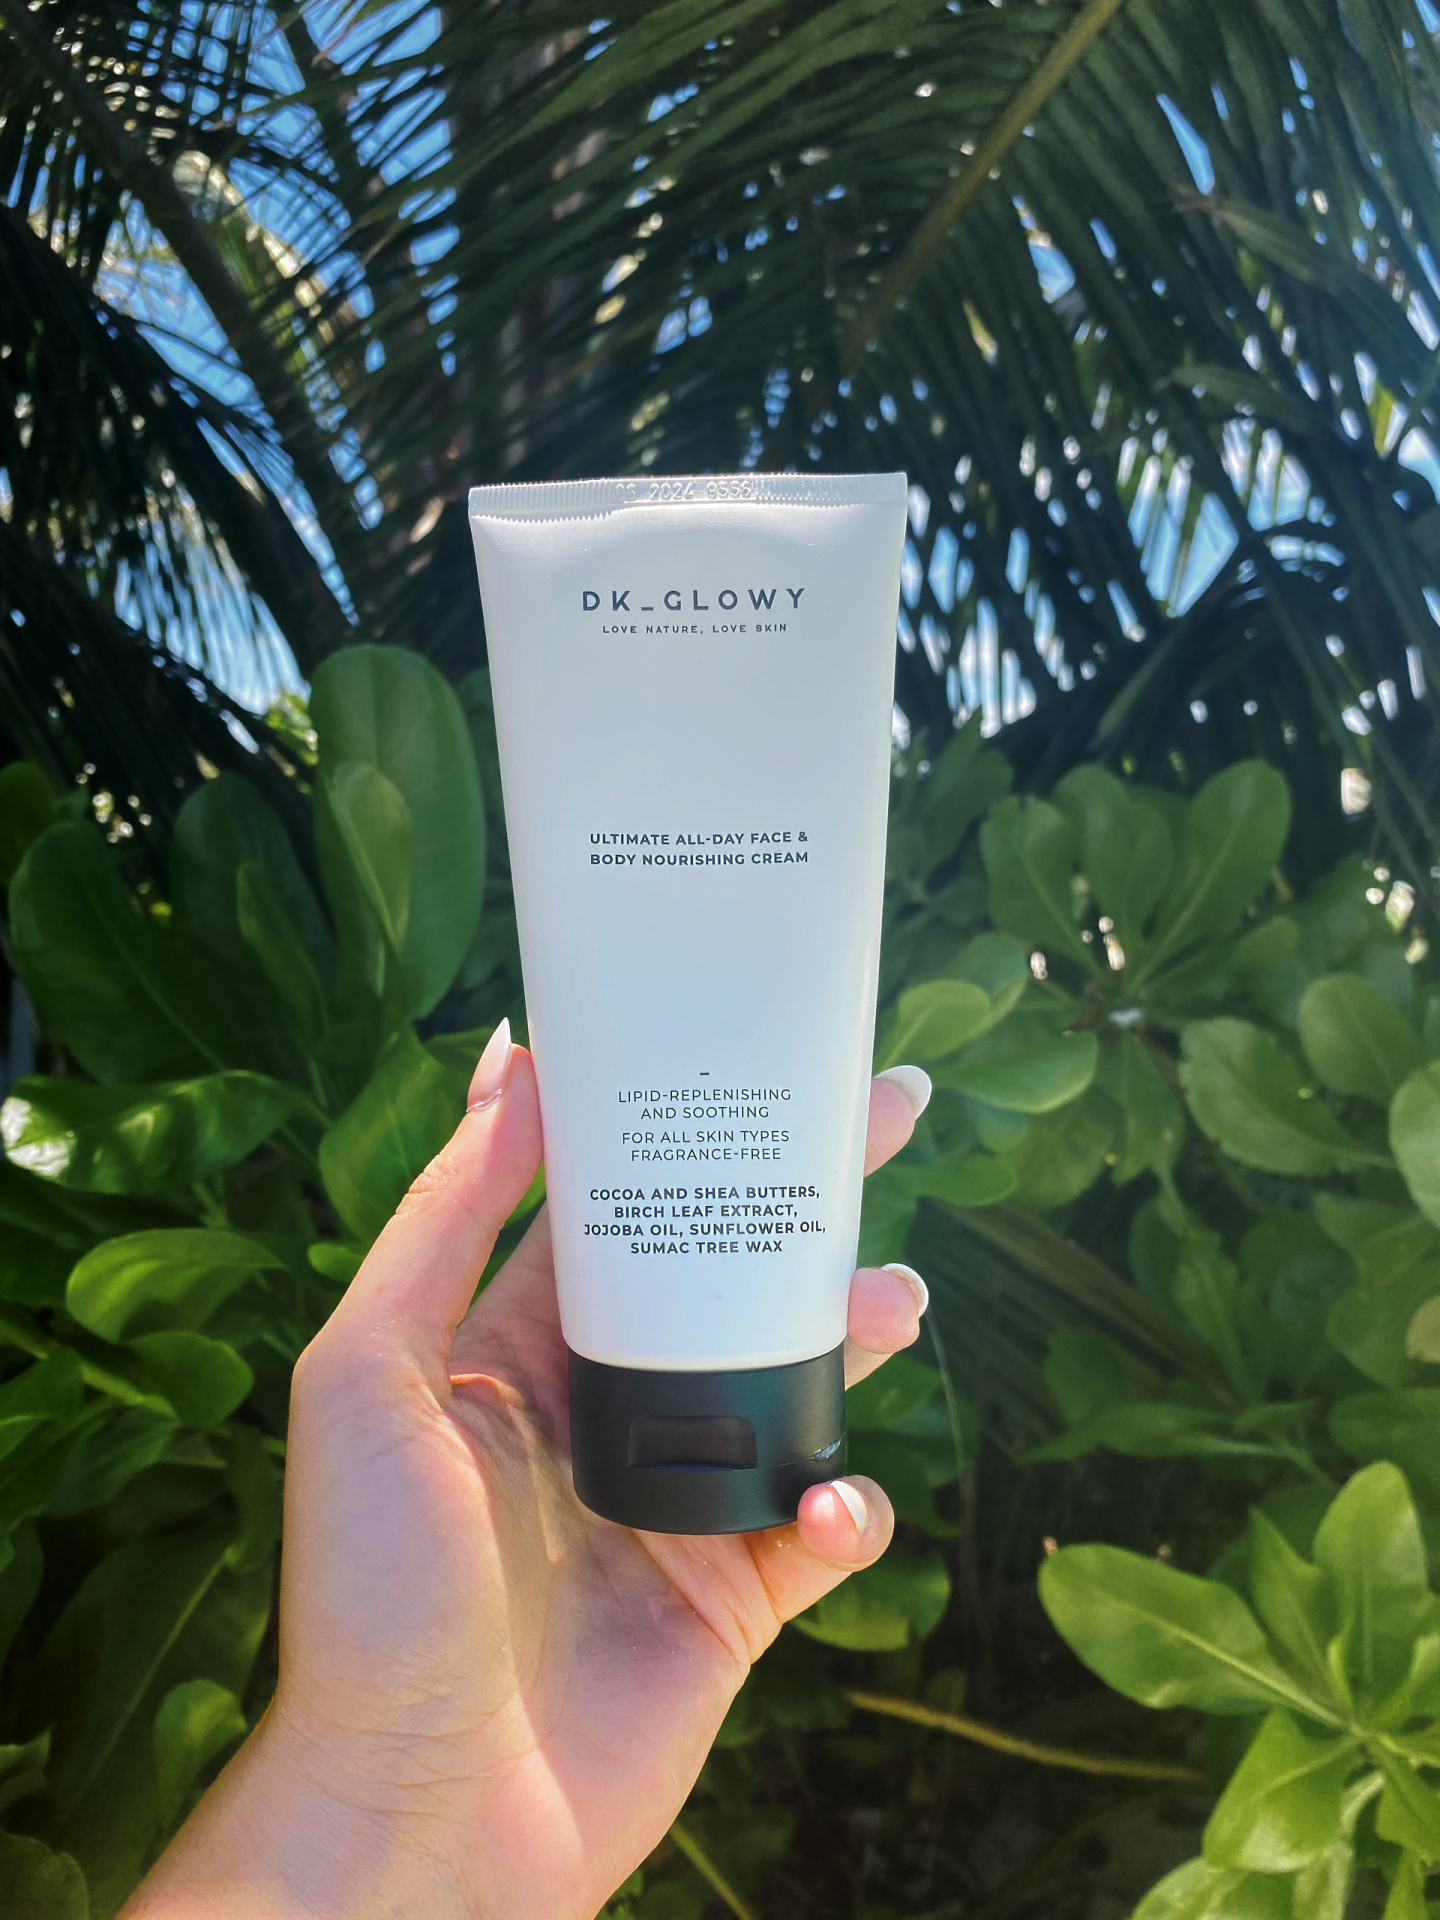 DK Glowy Ultimate All Day Face and Body Nourishing Cream